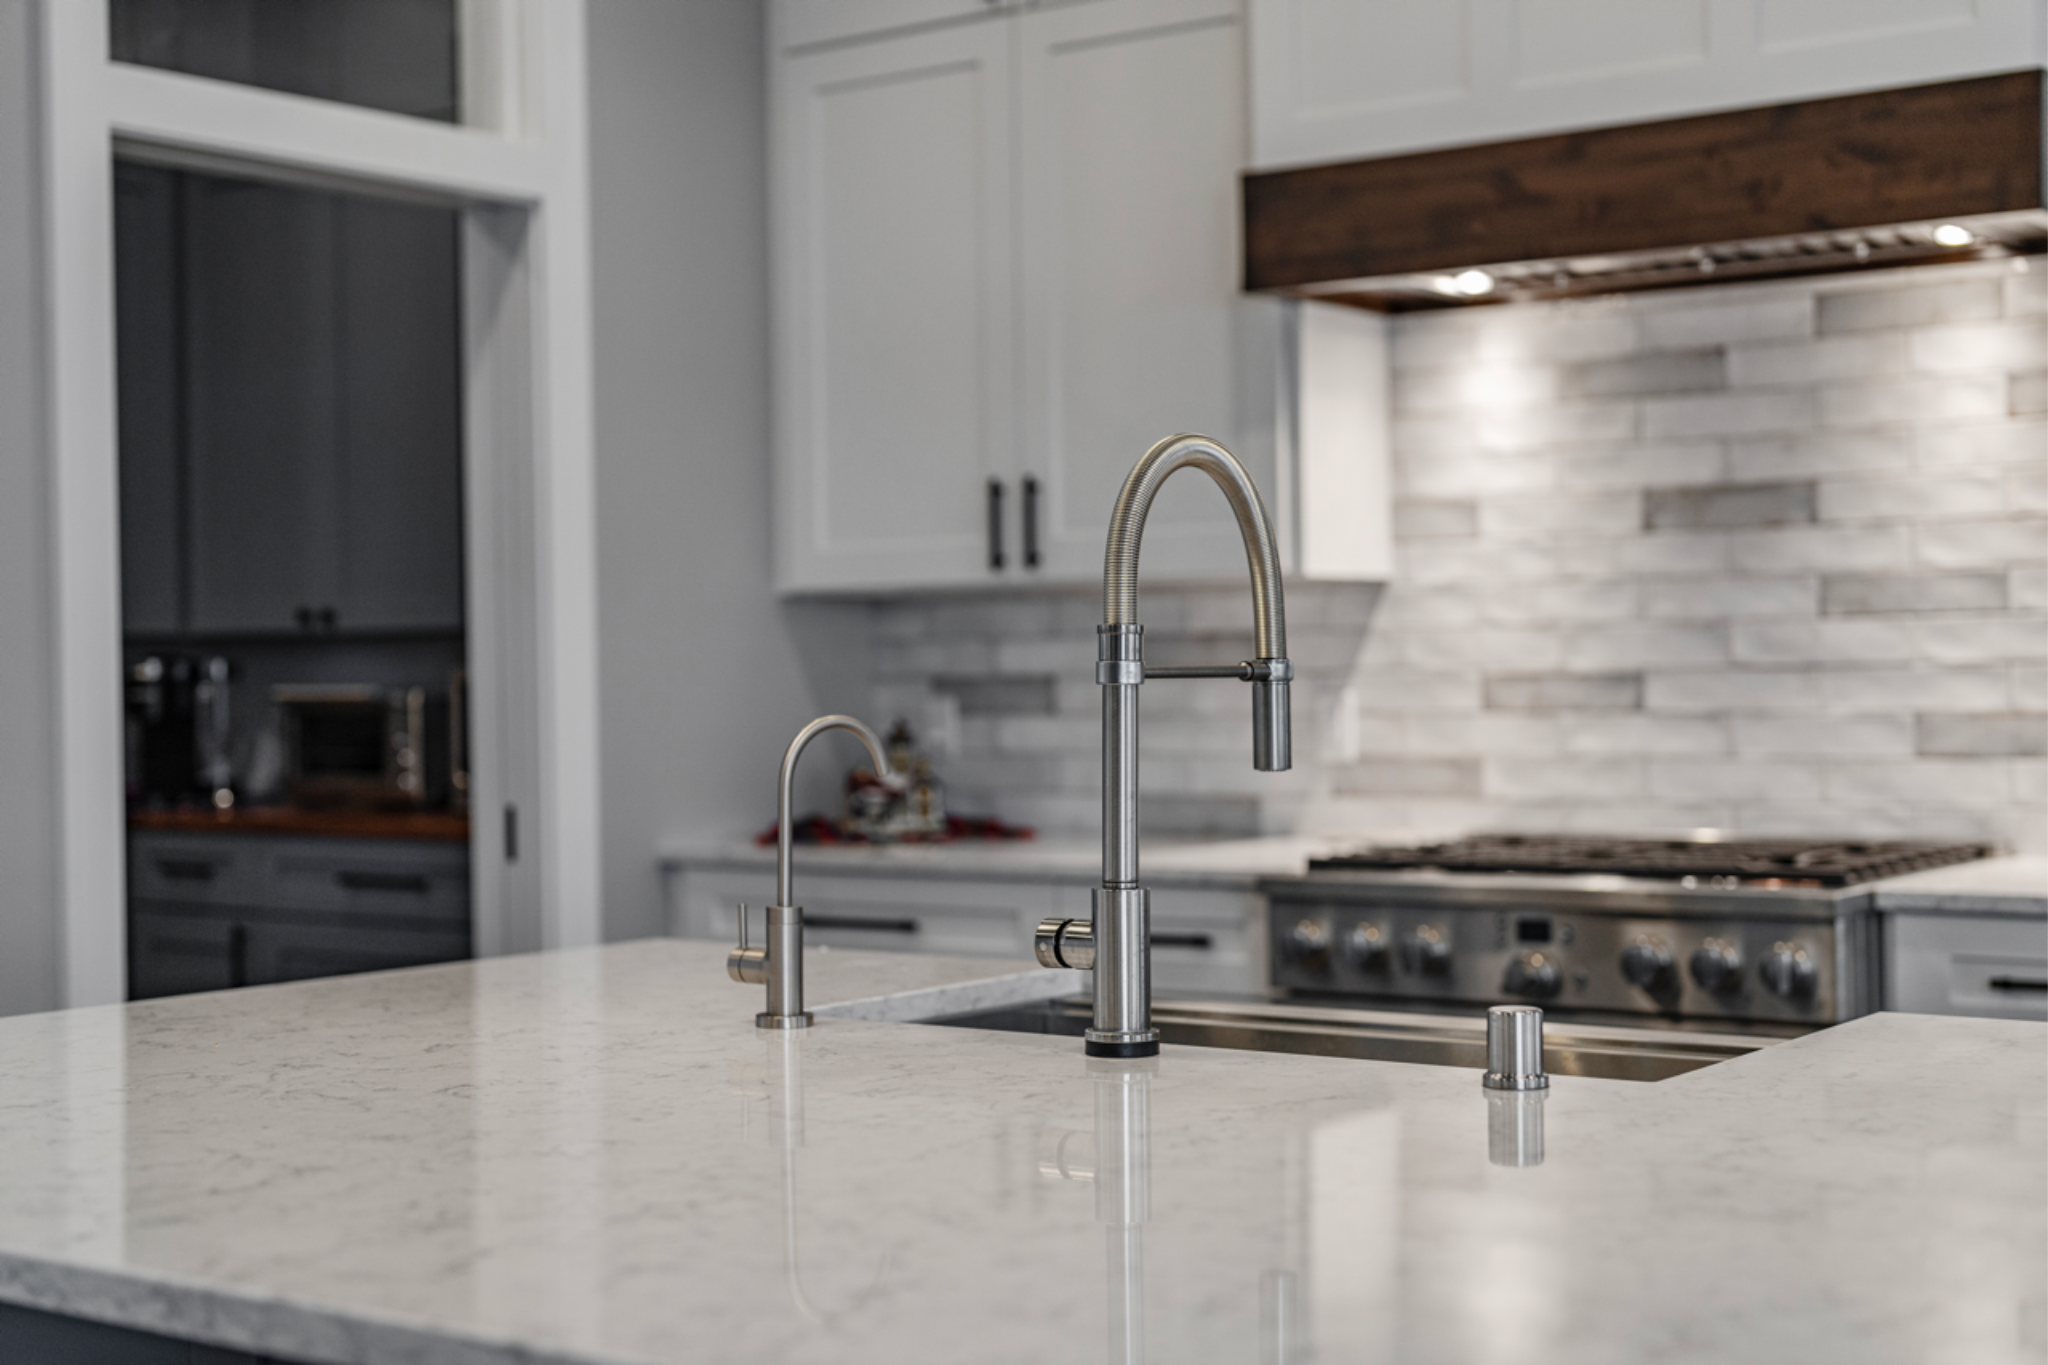 Modern kitchen with marble countertops, showcasing one of the best countertop materials for a luxurious look.